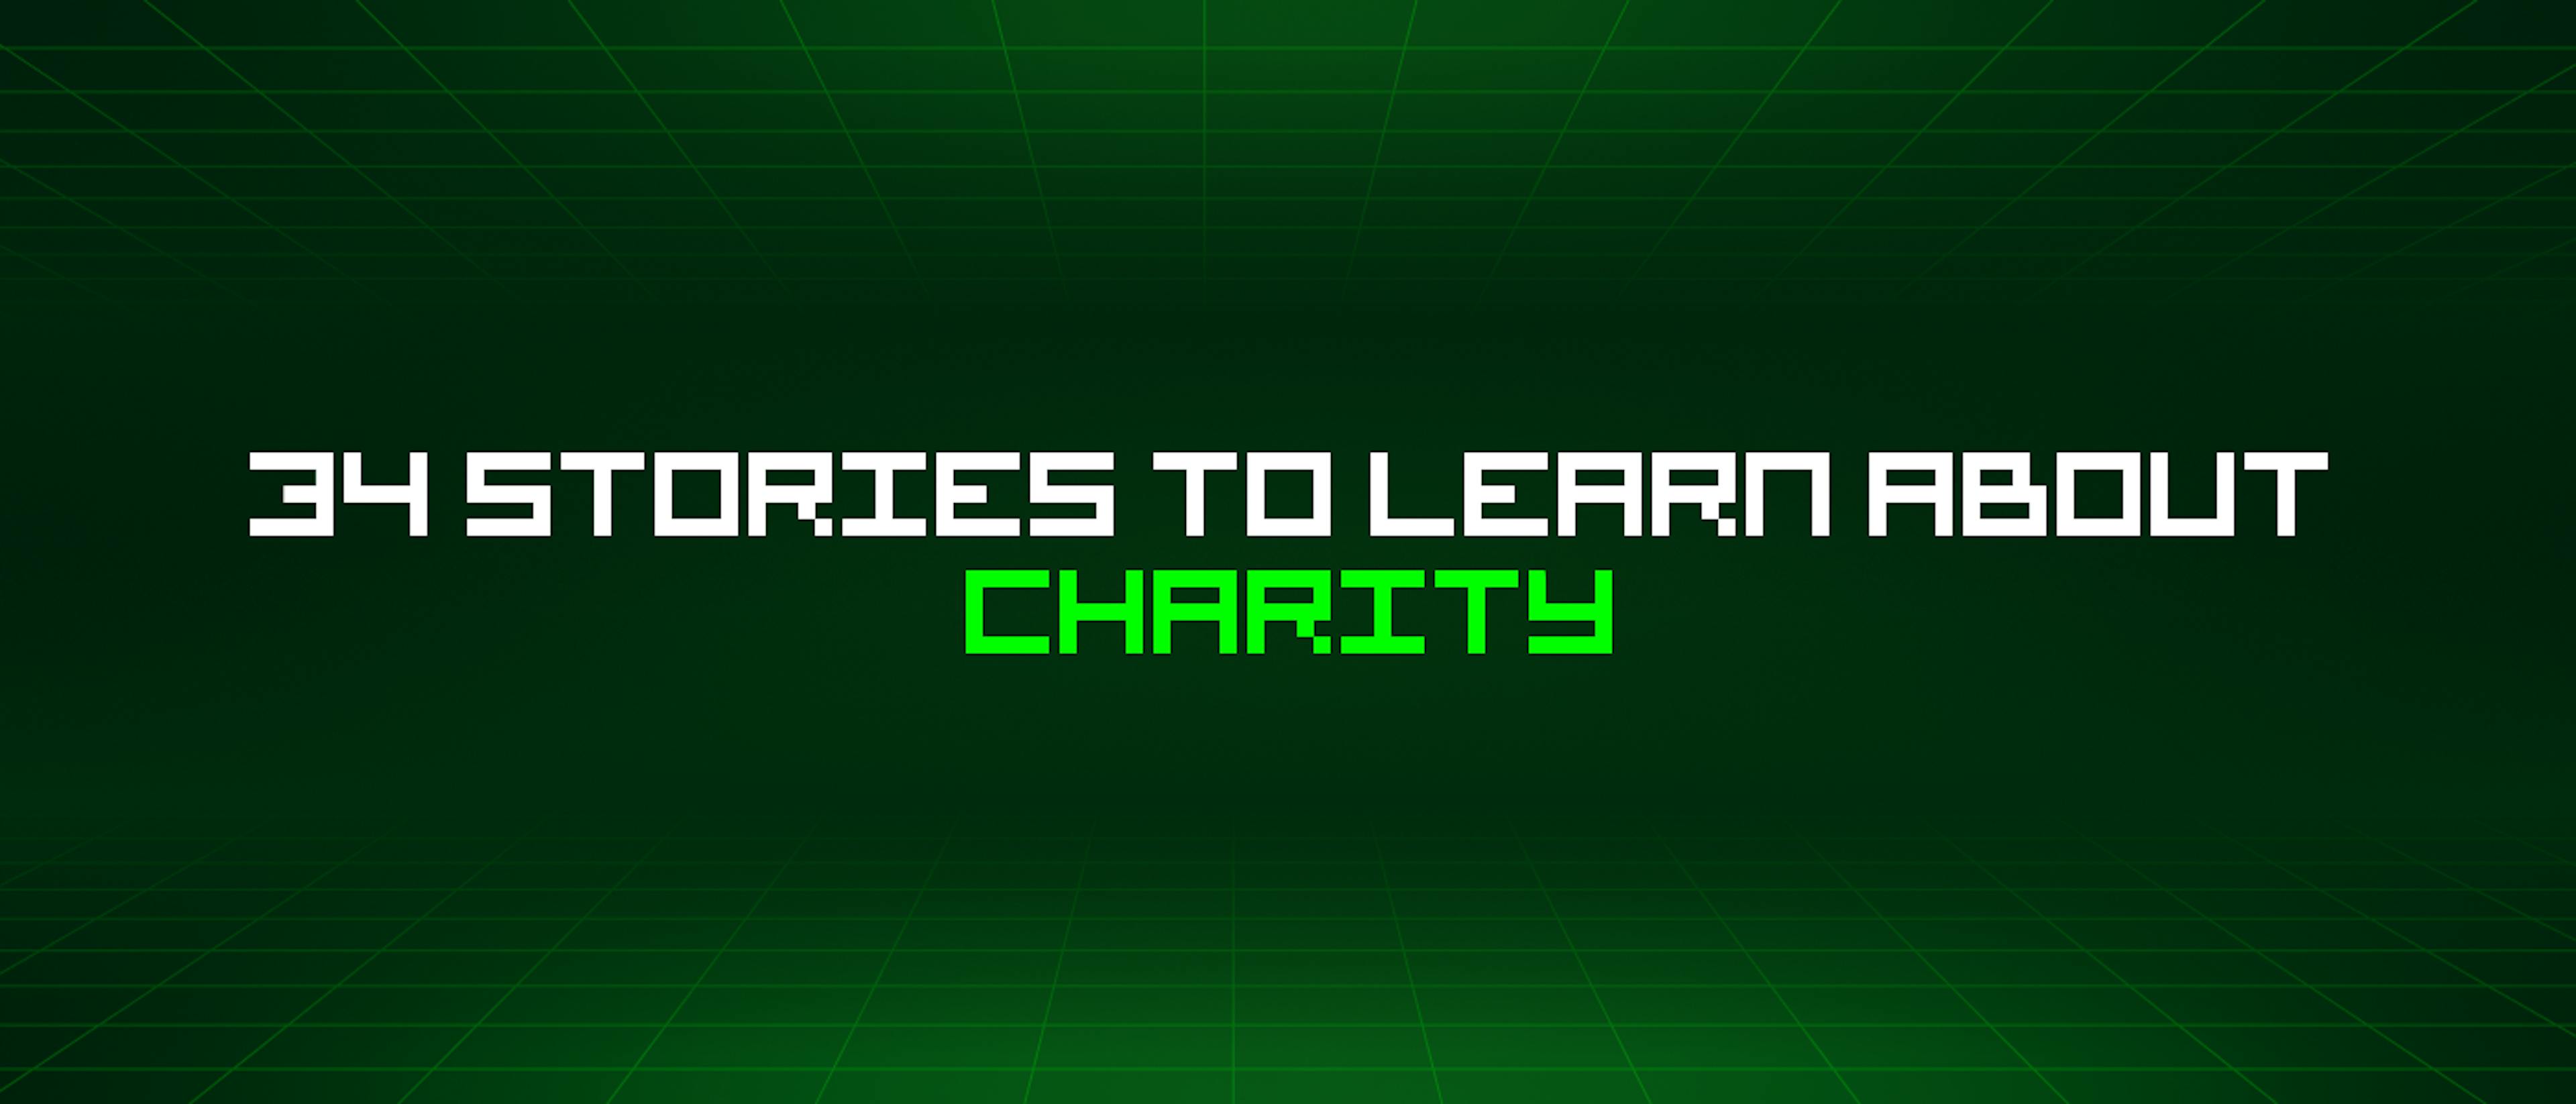 featured image - 34 Stories To Learn About Charity